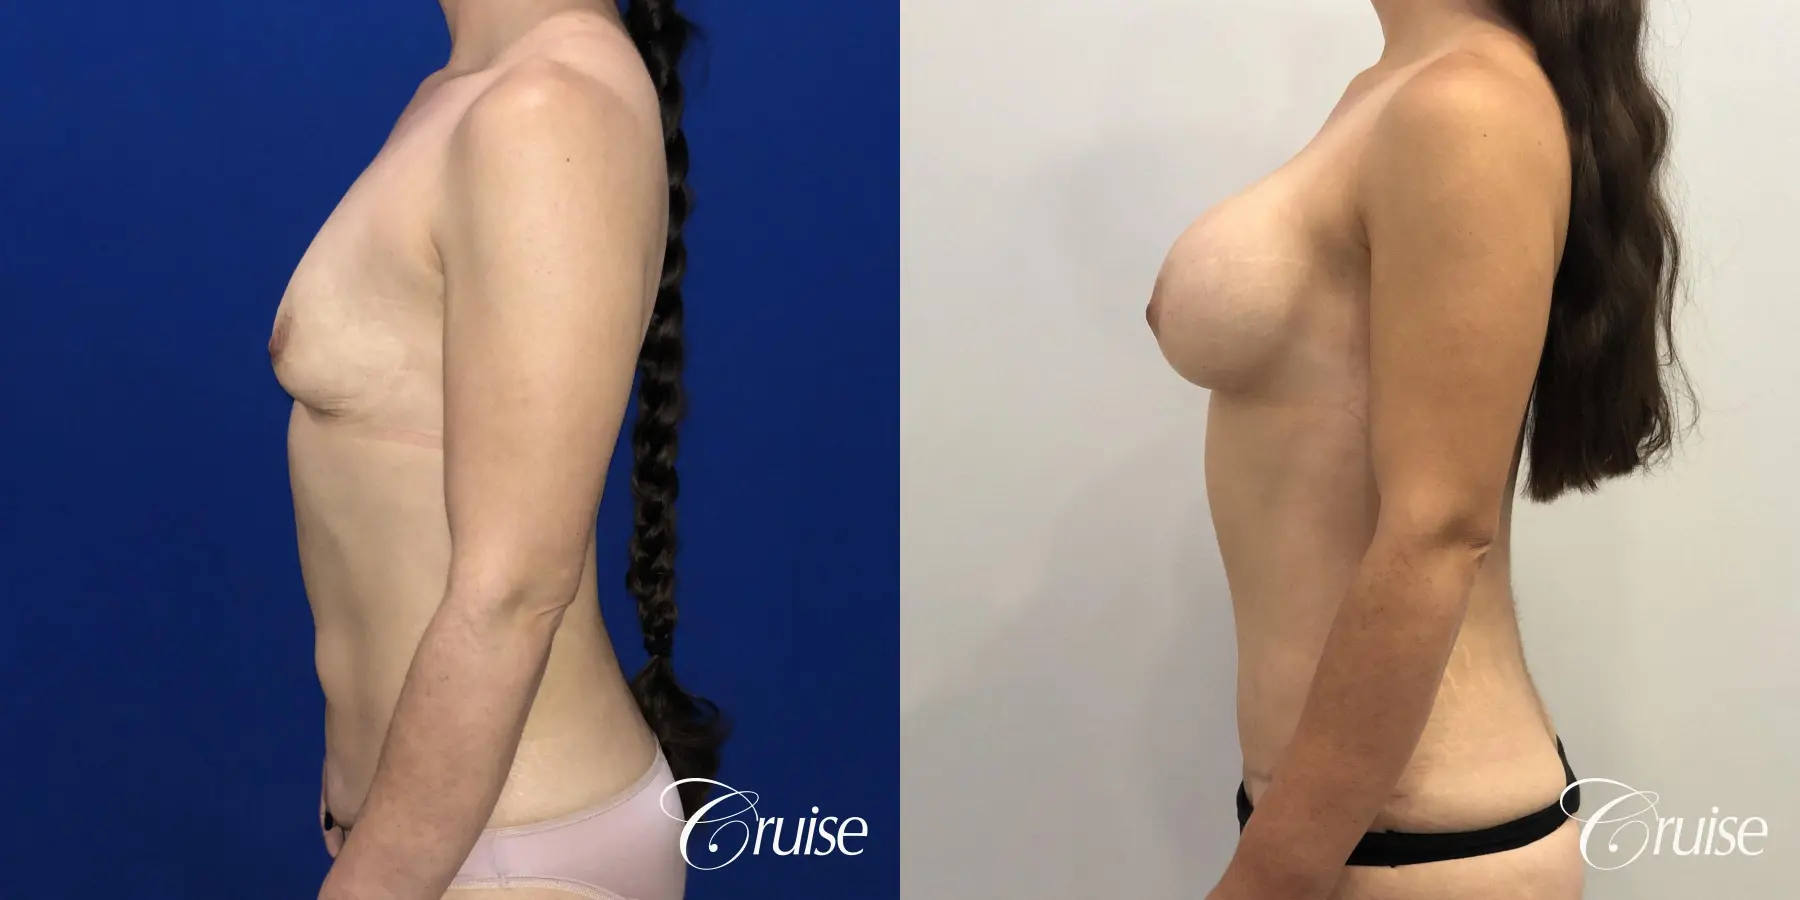 Breast Augmentation, Tummy Tuck - Before and After 2